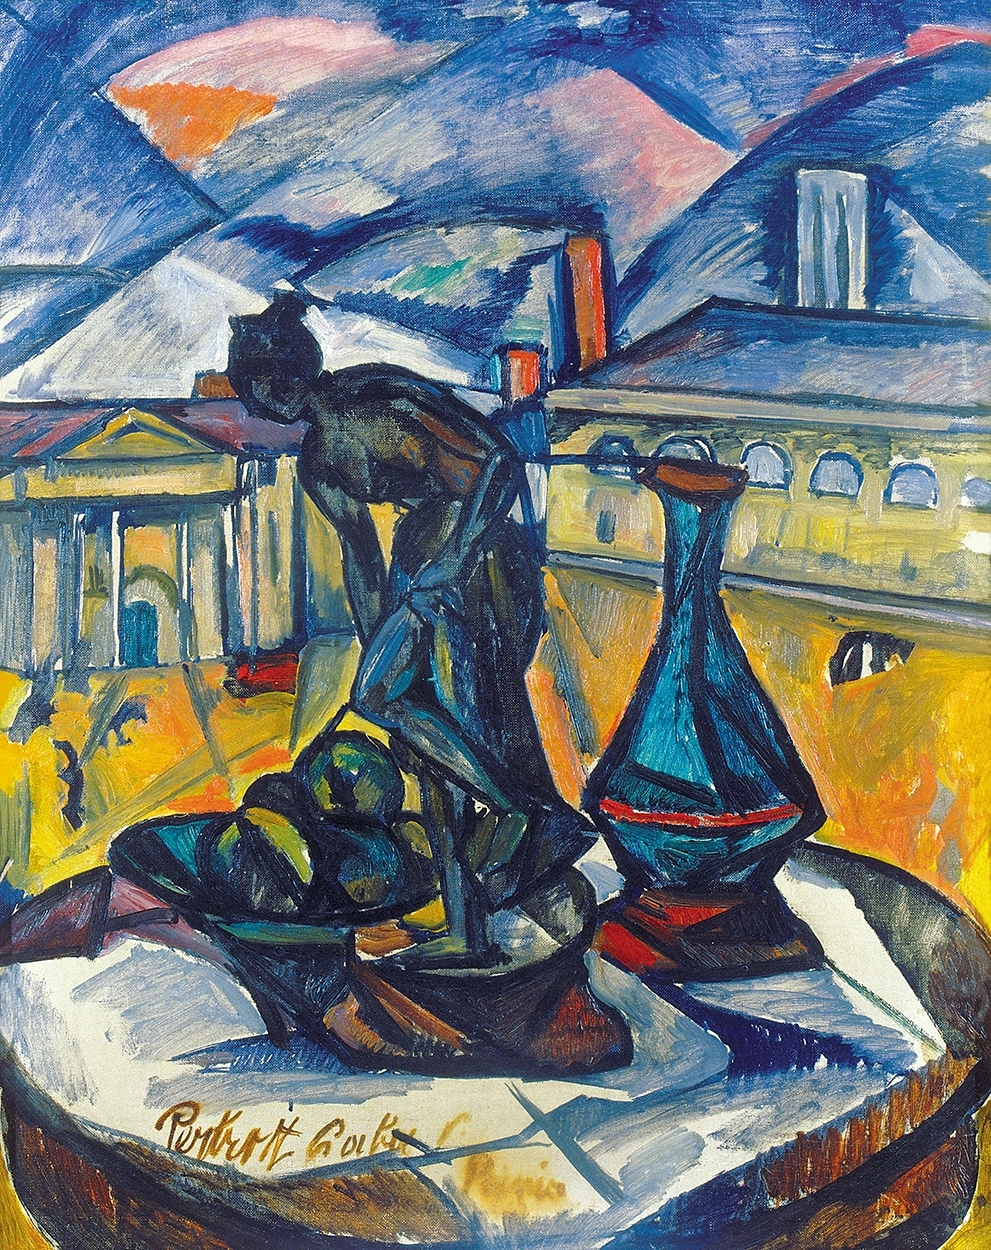 Perlrott-Csaba Vilmos (1880-1955) Still-life with Sculpture, with Paris in the background, 1912